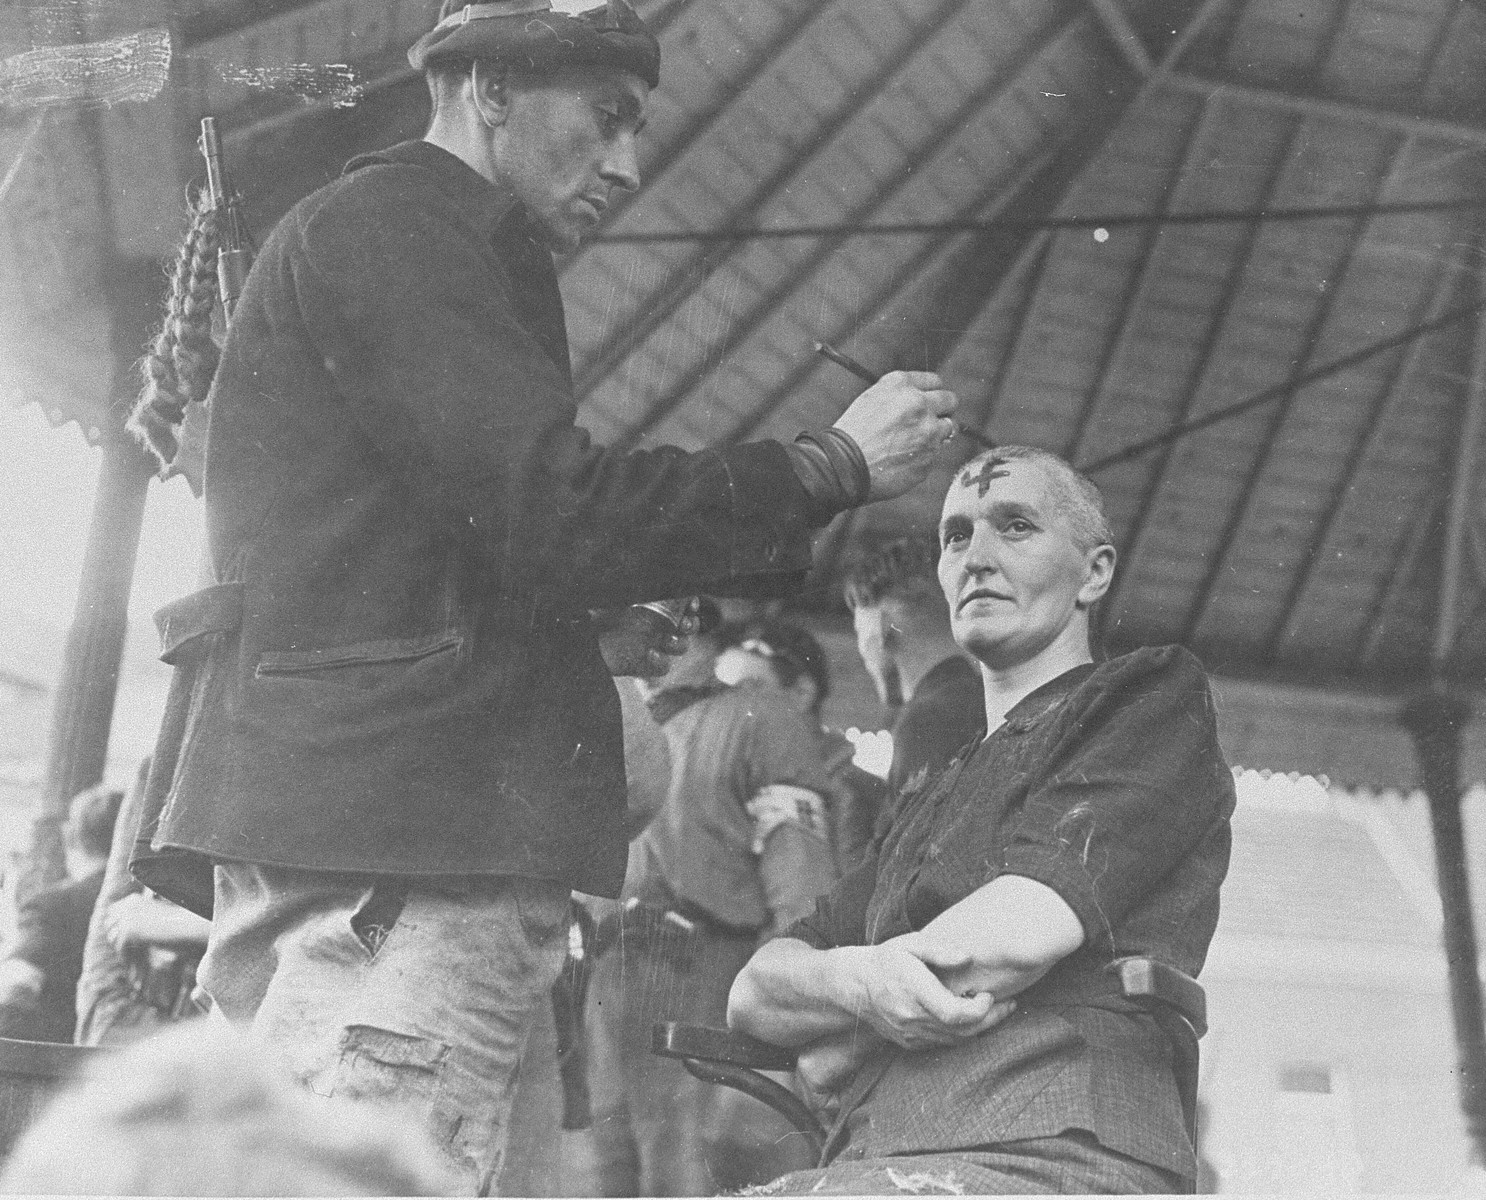 A member of the Belgian resistance paints a swastika on the forehead of a woman who collaborated with the Germans during the occupation of Belgium.  The resistance shaved her head and the heads of four other women in Lanaken as part of their public humilation.